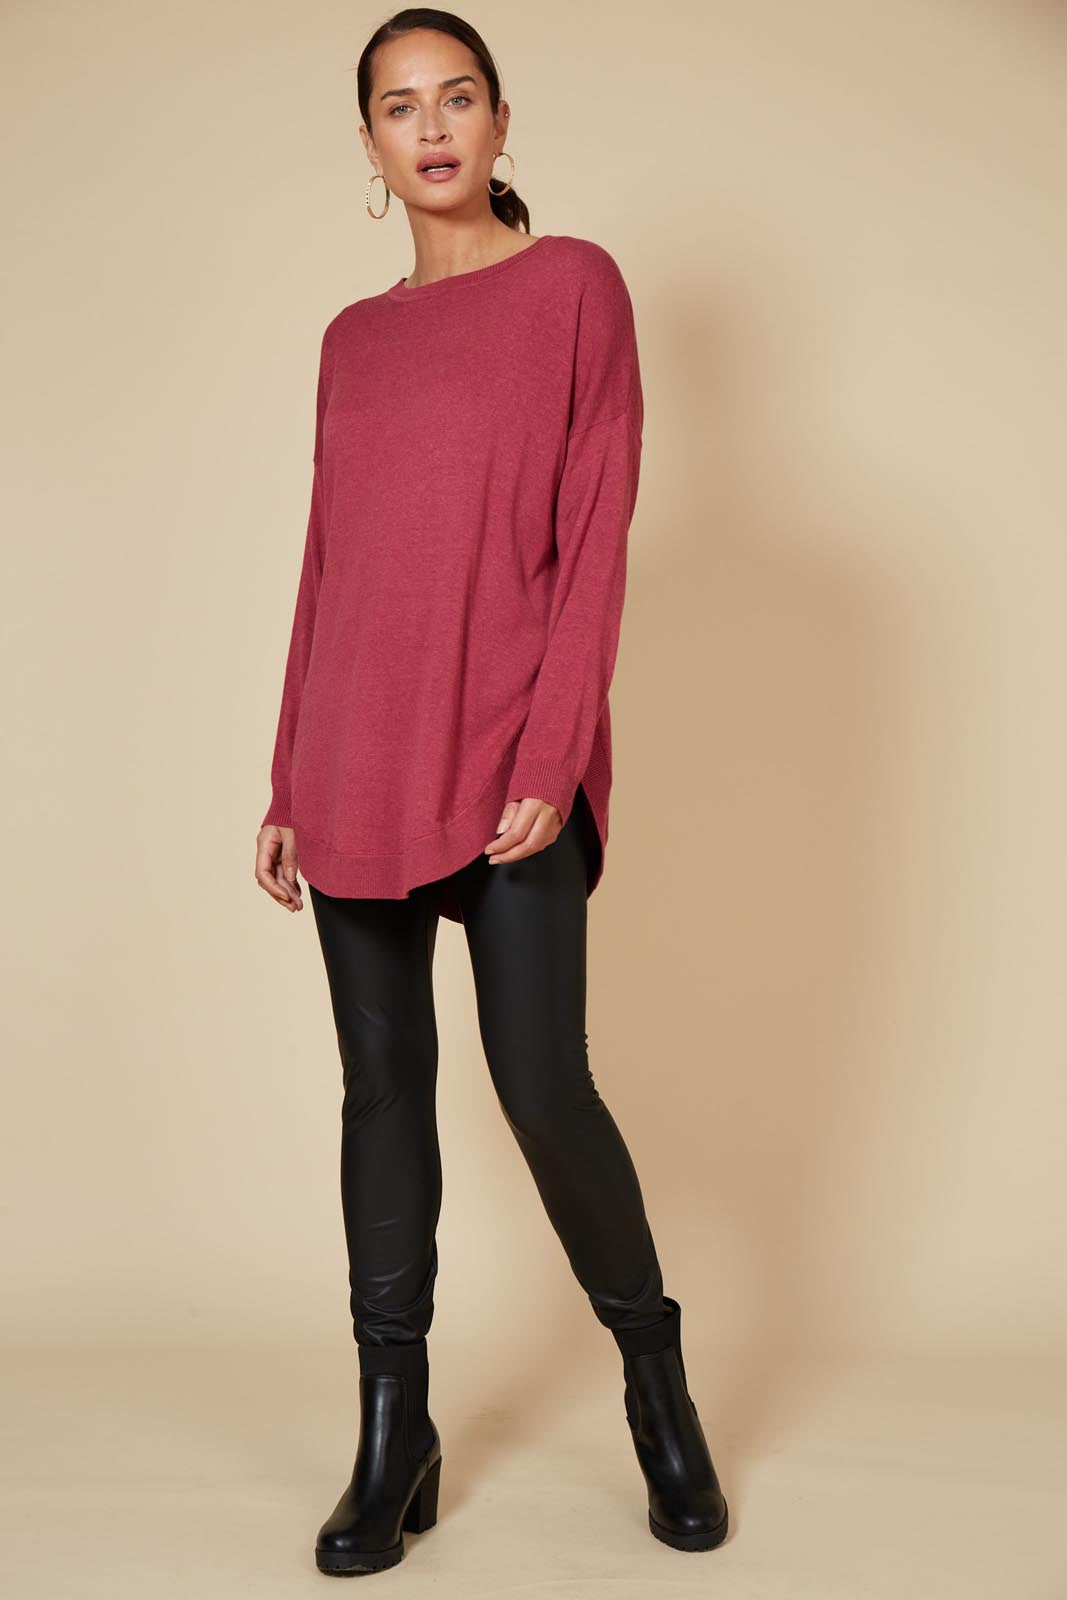 Cleo Jumper - Mulberry - eb&ive Clothing - Knit Jumper One Size